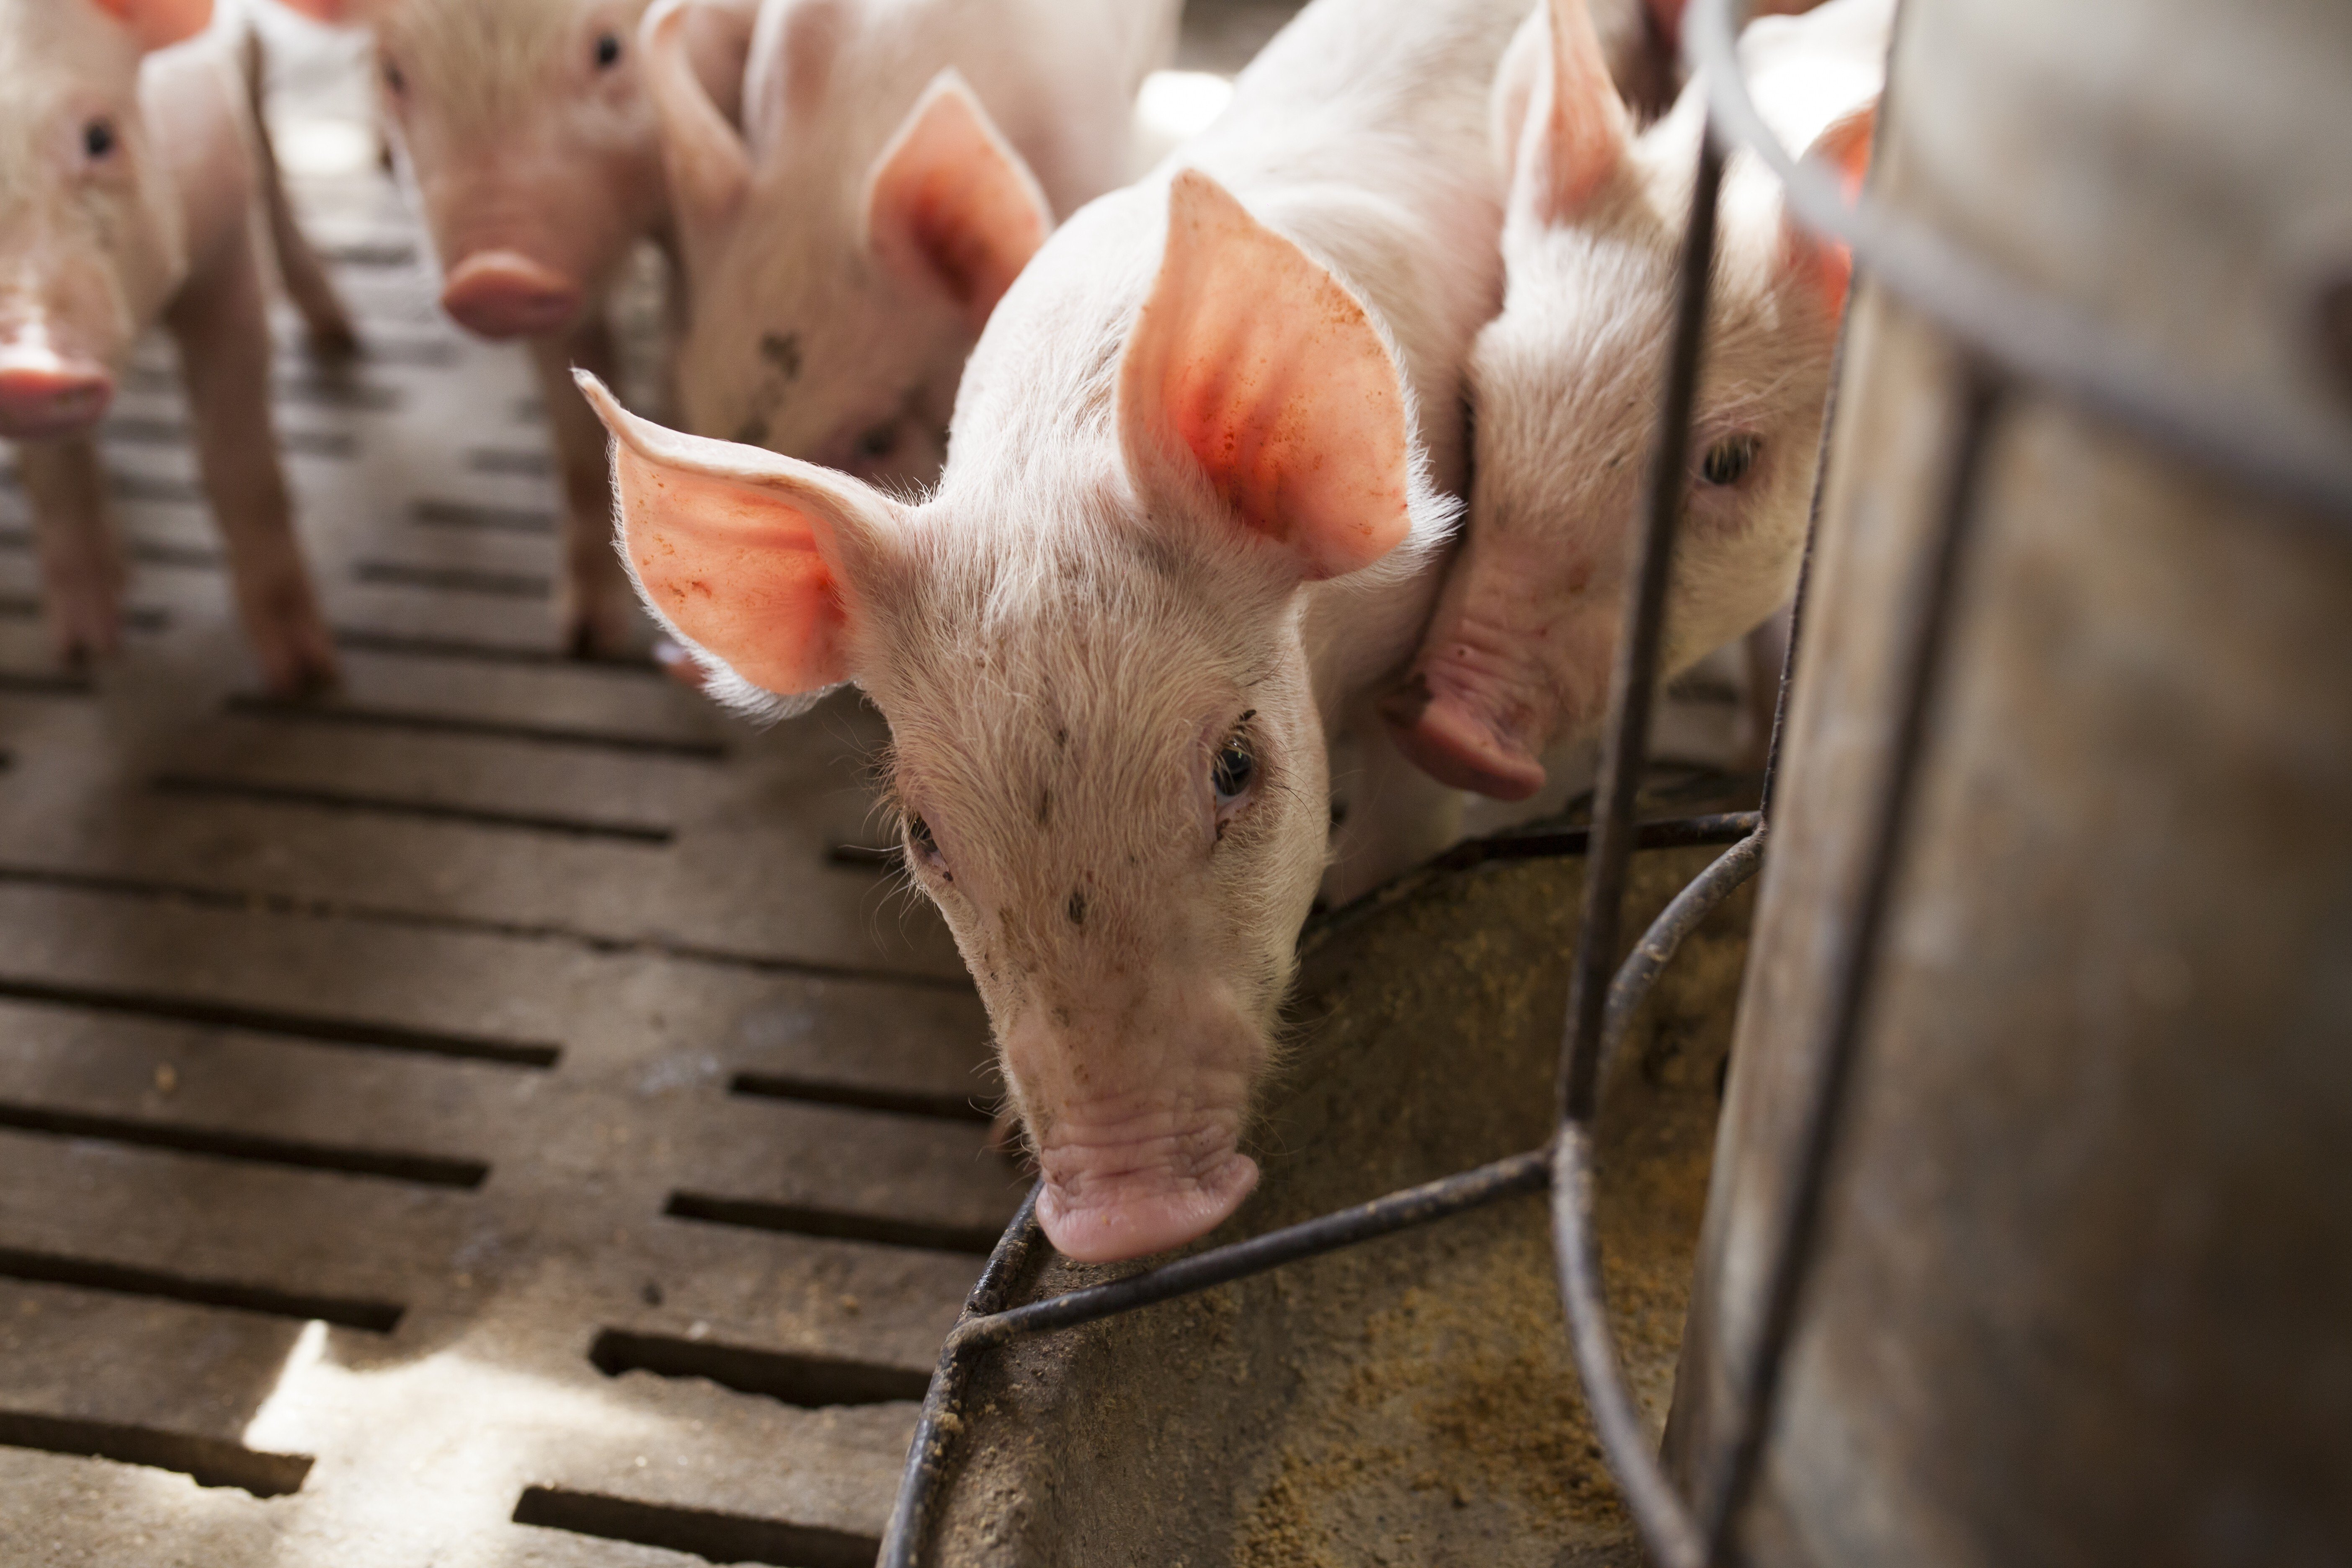 Many of China’s small pig farmers are struggling to survive due to the pork price volatility that followed African swine fever. Photo: Shutterstock